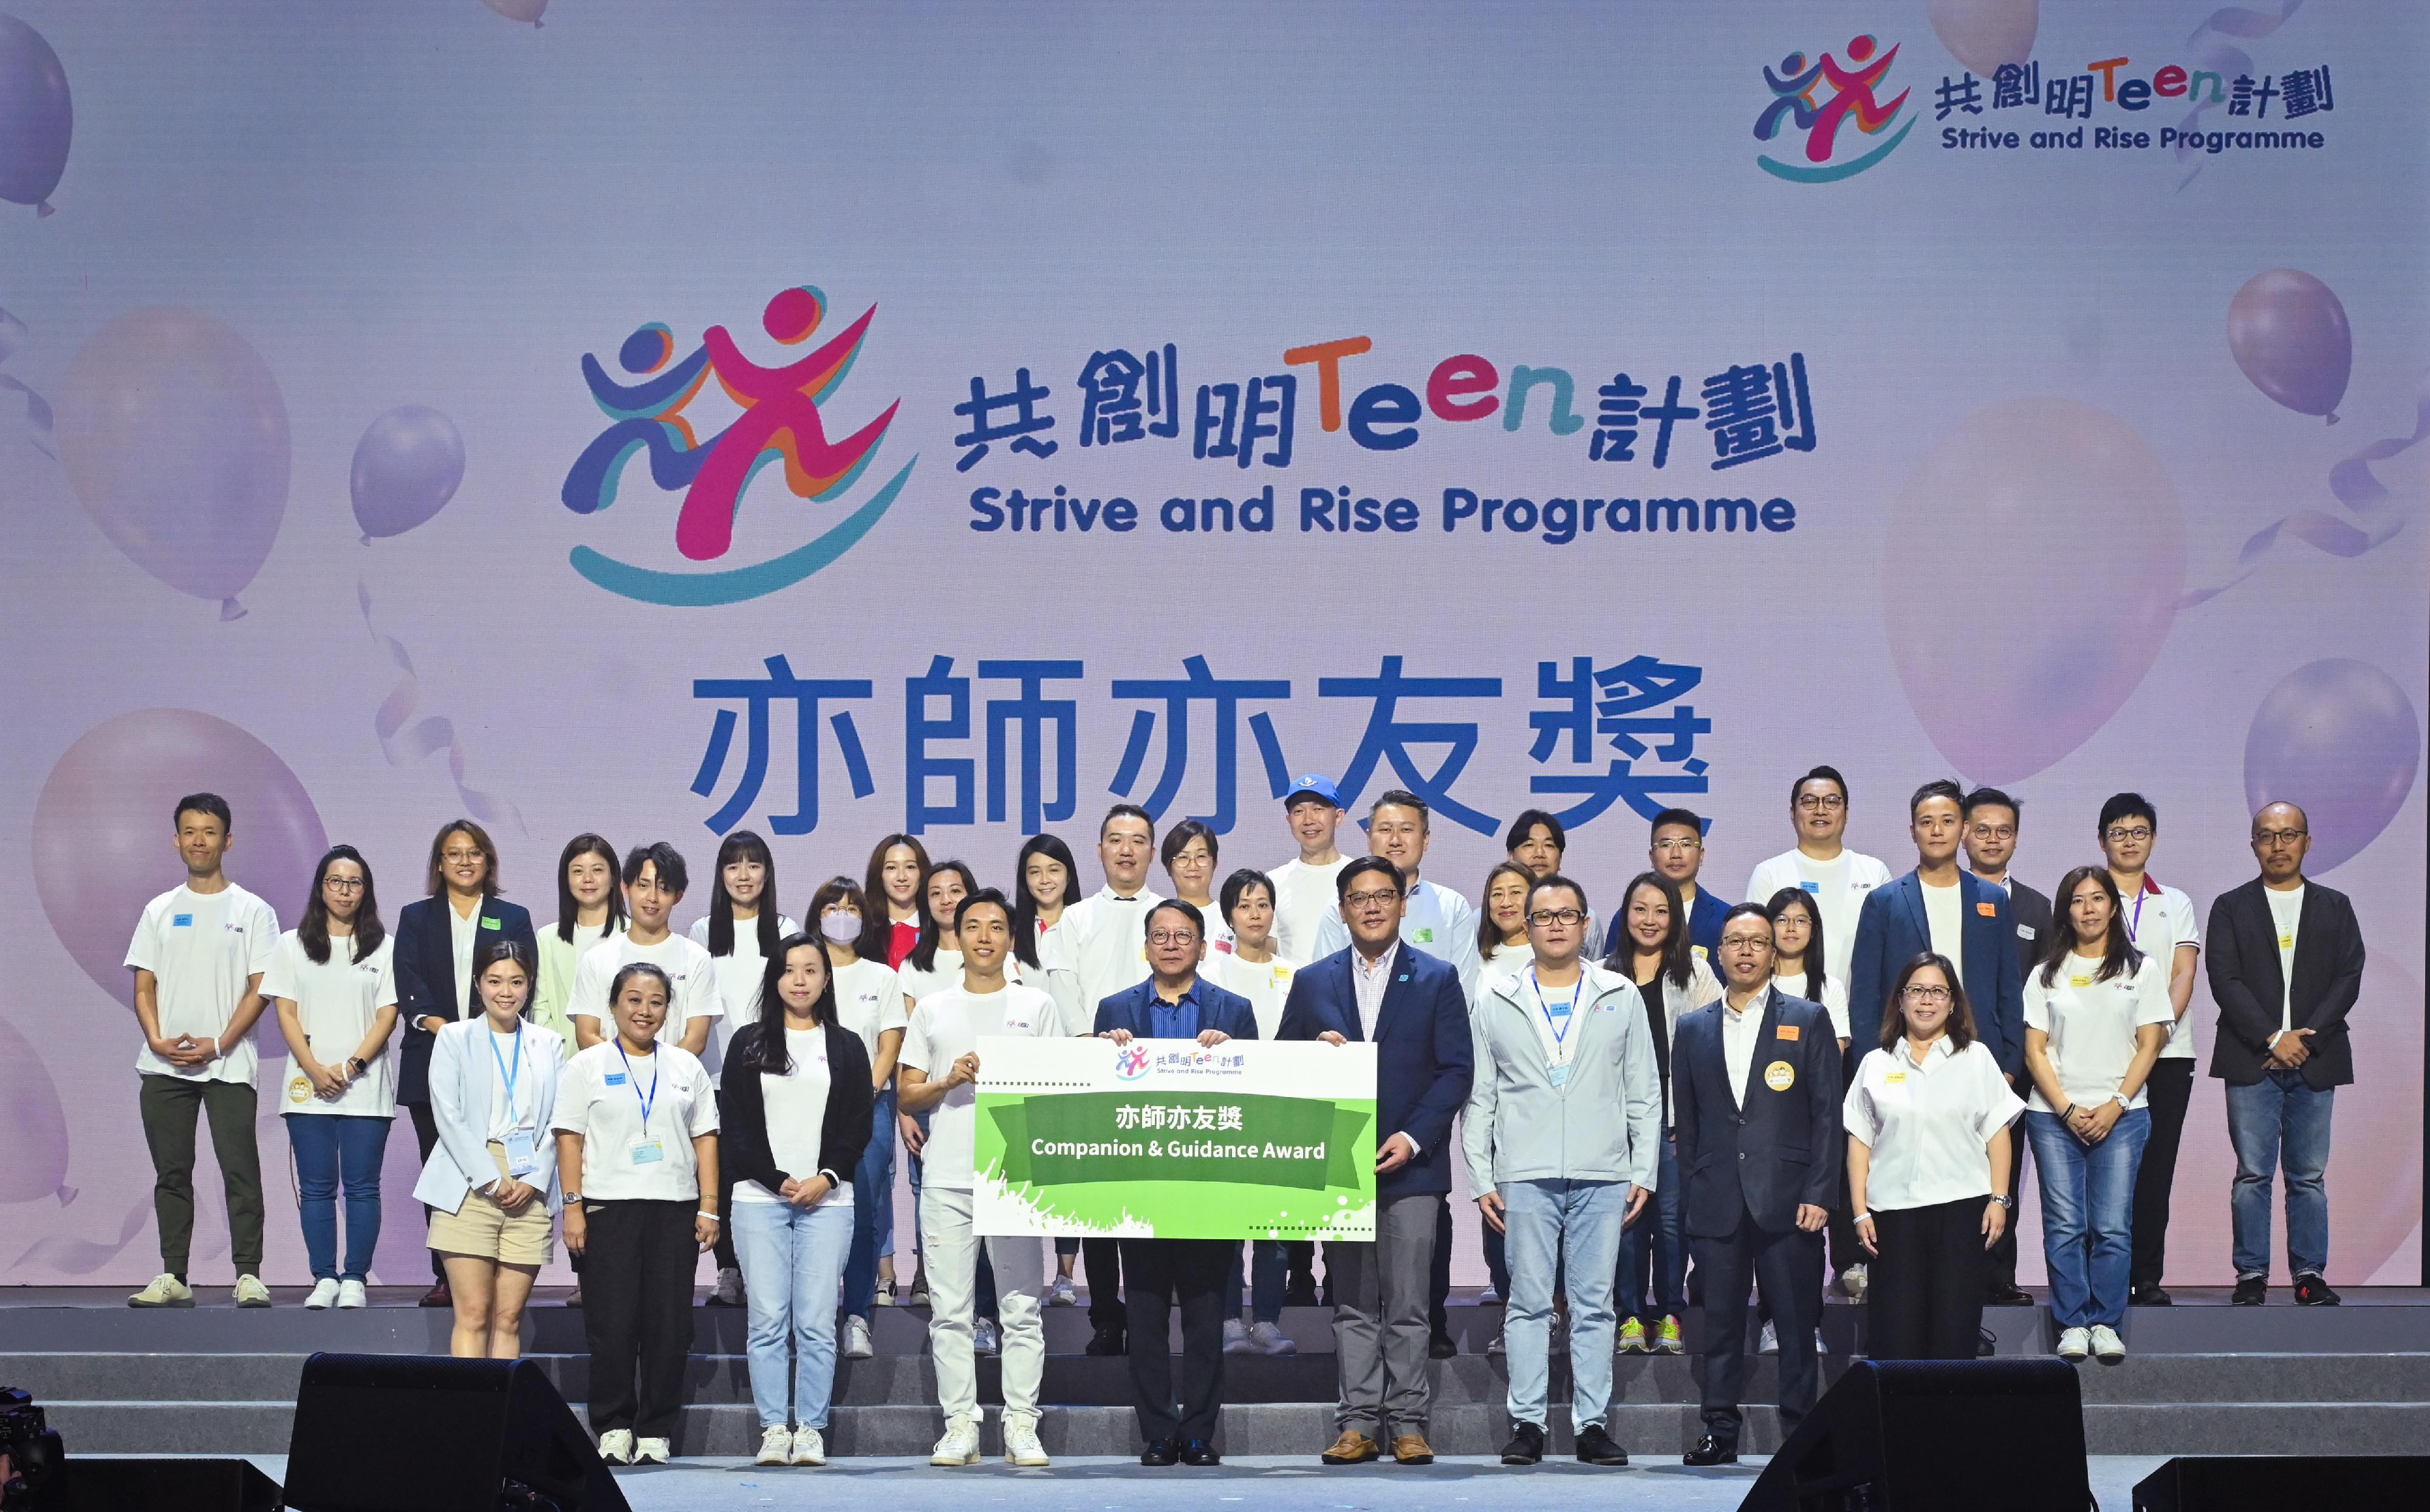 The Chief Secretary for Administration, Mr Chan Kwok-ki, attended the Graduation Ceremony of the Strive and Rise Programme today (November 4). Photo shows Mr Chan (front row, centre) and the Under Secretary for Home and Youth Affairs, Mr Clarence Leung (front row, fourth right), with awarded mentors.